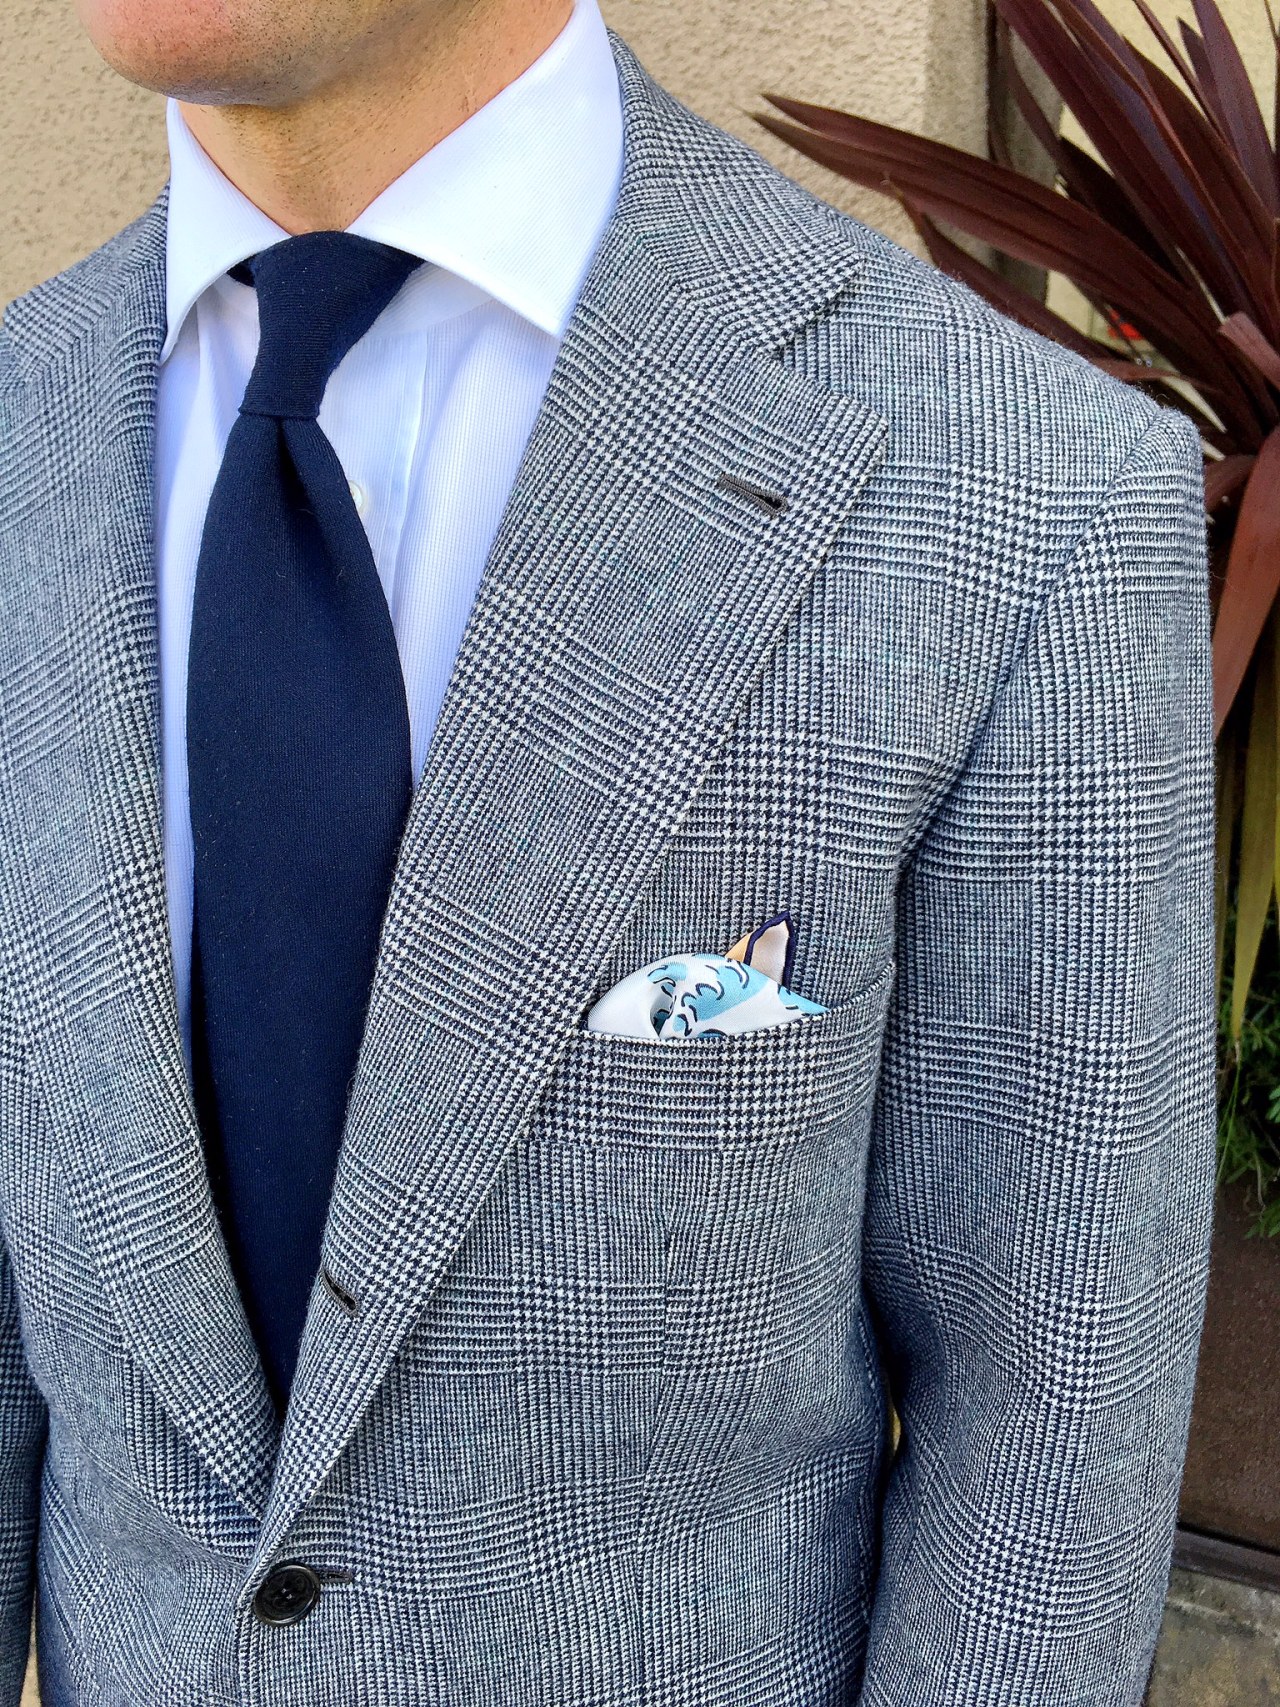 Not So Secret: A Solid Navy Tie Goes with Everything – Put This On